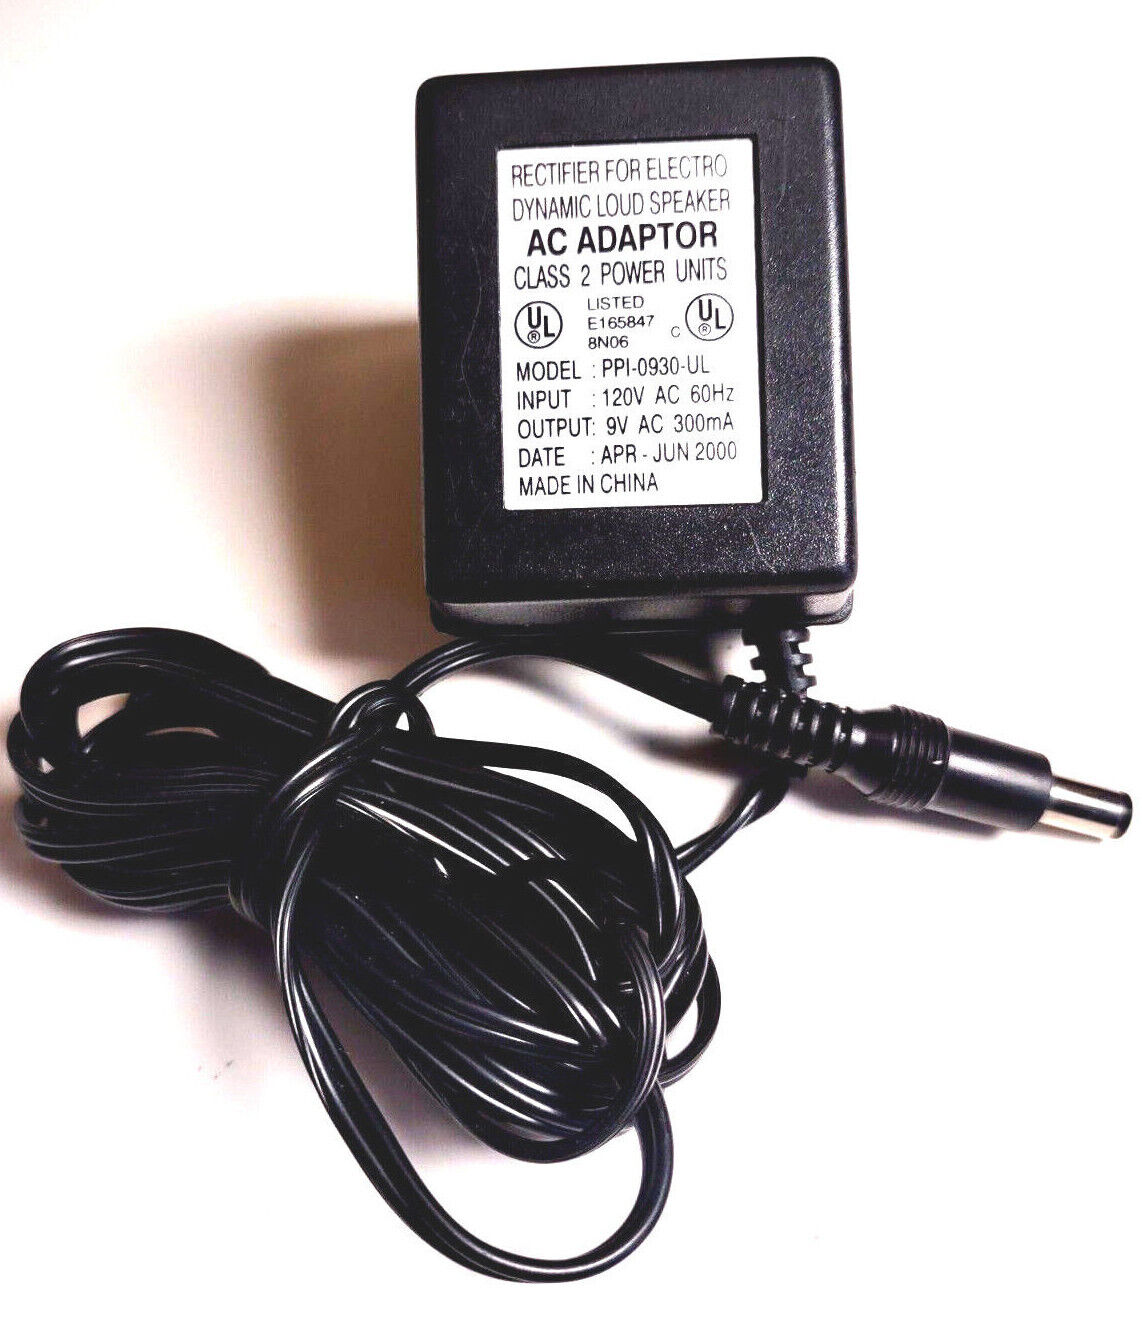 Loud Speaker 9V 300mA Class 2 Power Supply AC/DC Adapter M PPI-0930UL RECTIFIER Compatible Brand: Universal Brand: